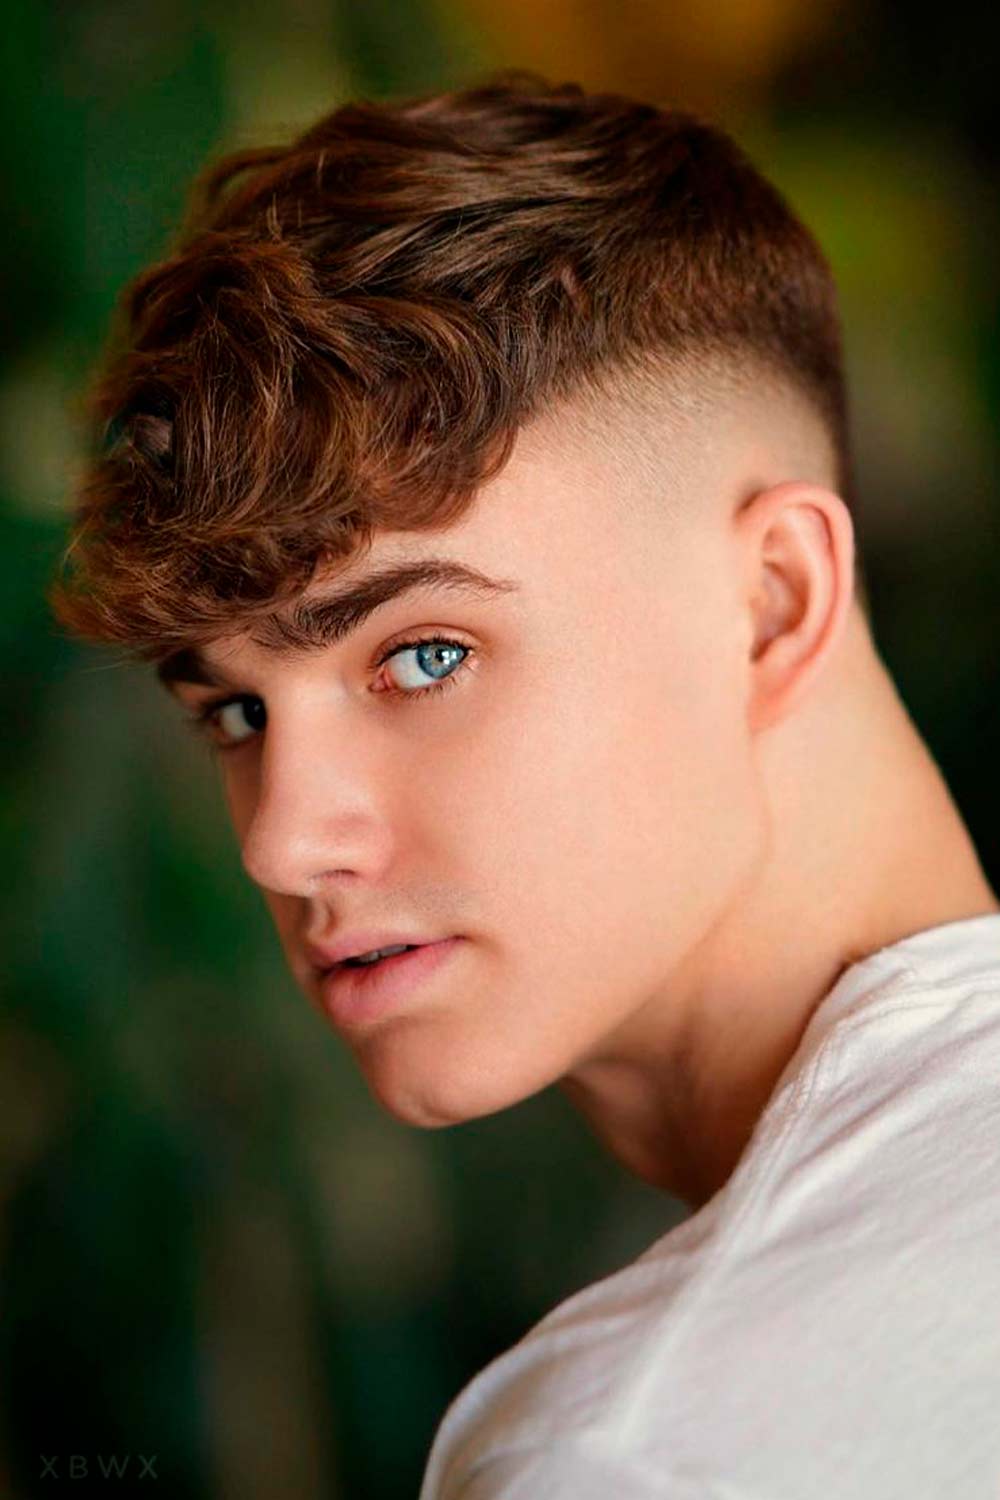 Half Bun To Short Cropped, 5 Hairstyle Ideas For Men With Curly Hair -  News18